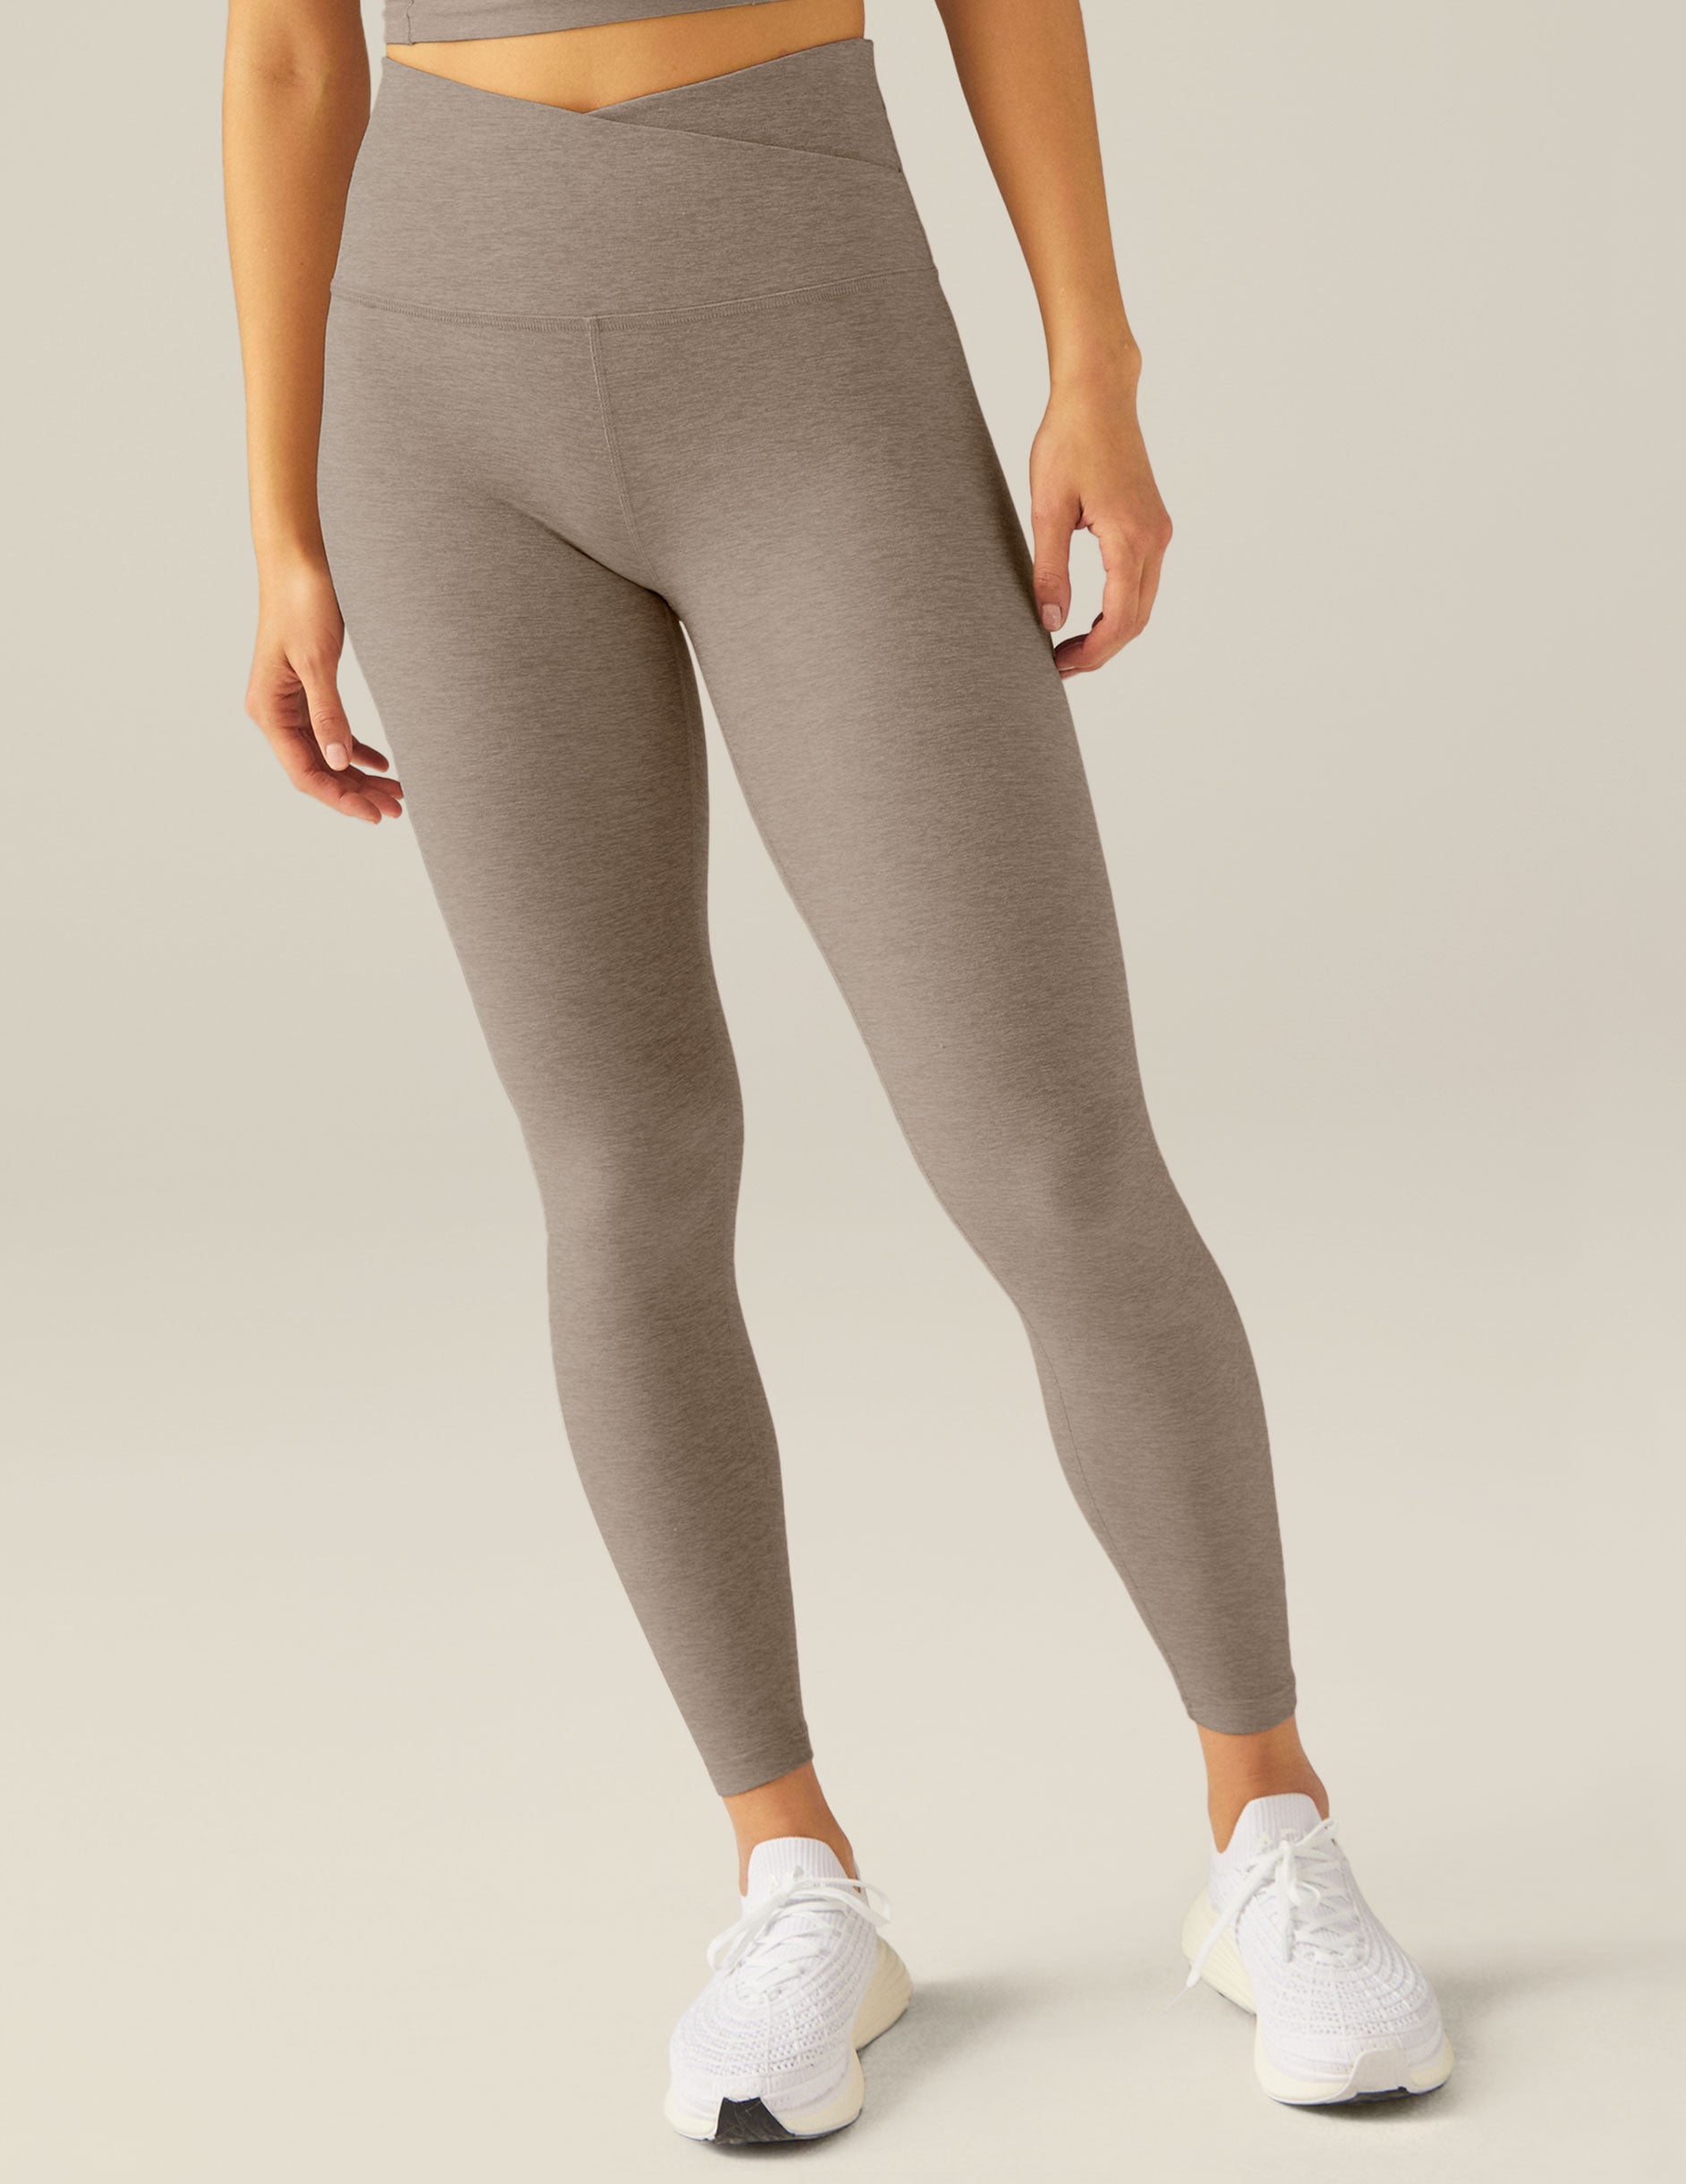 Beyond Yoga At Your Leisure High-Waisted Midi Leggings  Anthropologie  Korea - Women's Clothing, Accessories & Home